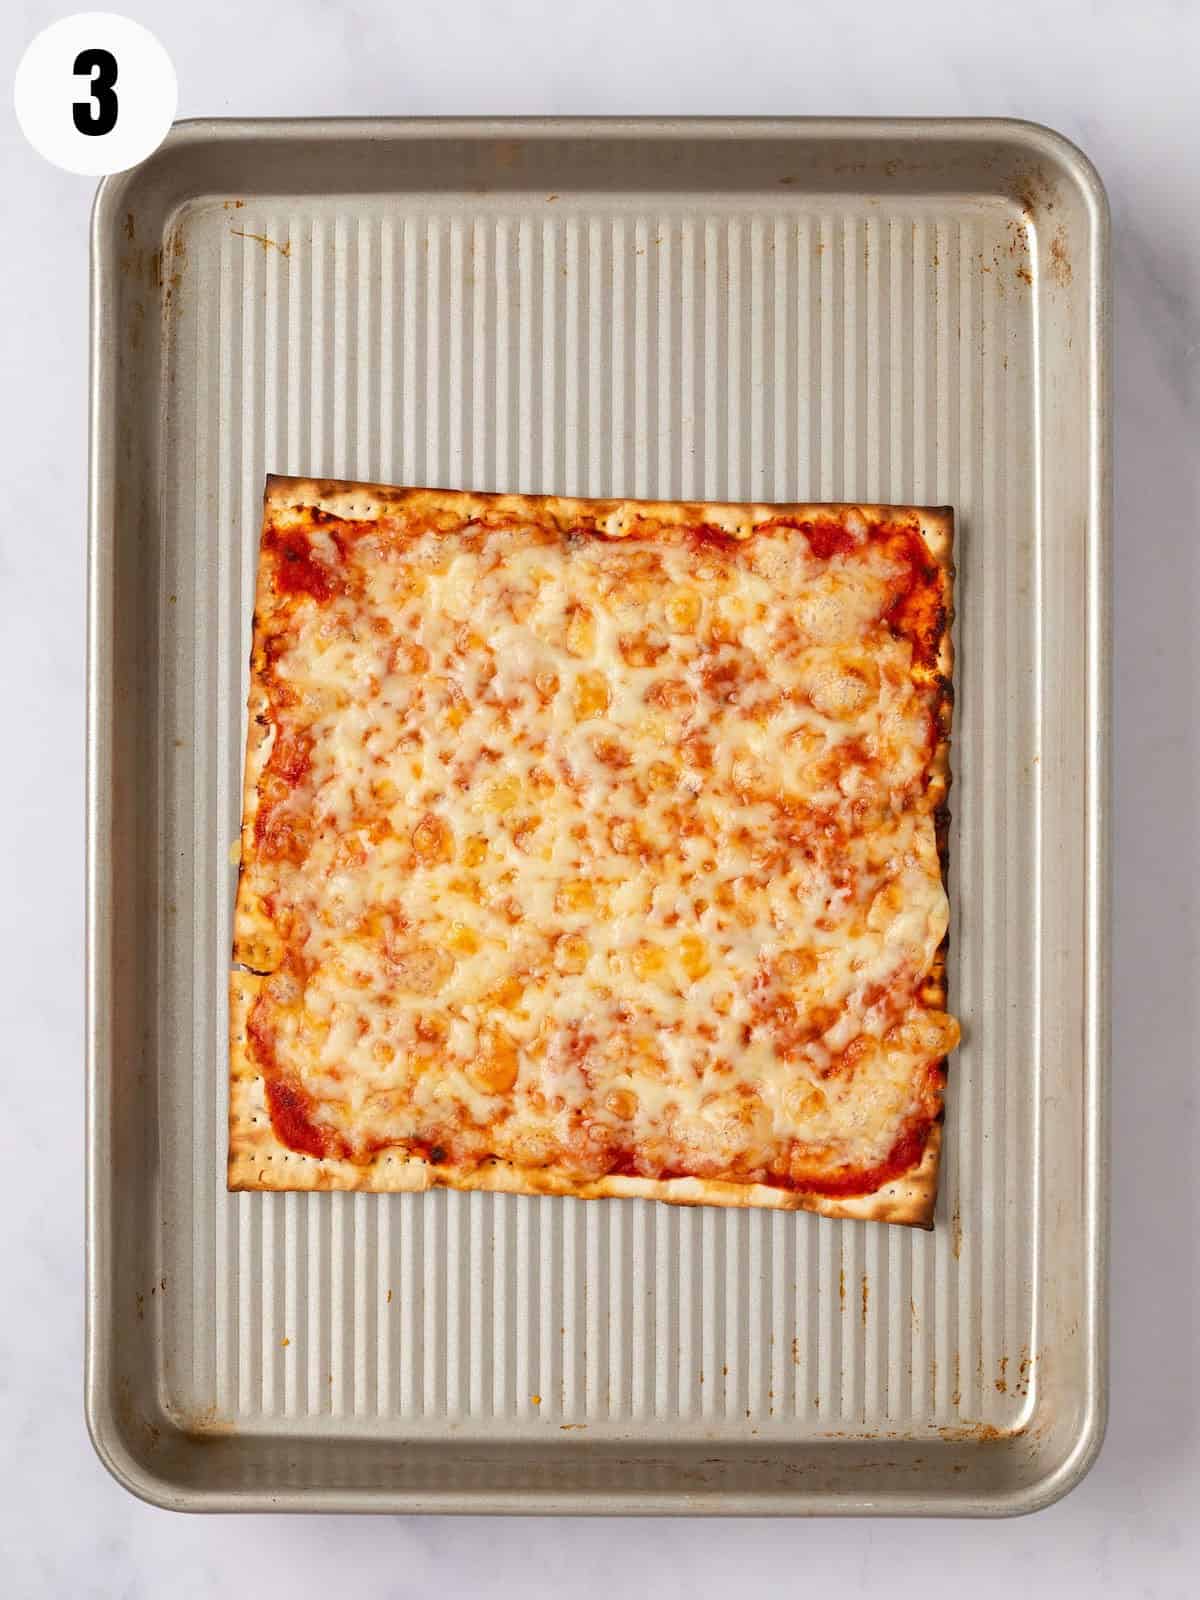 Baked matzo pizza with melted cheese on a baking sheet.